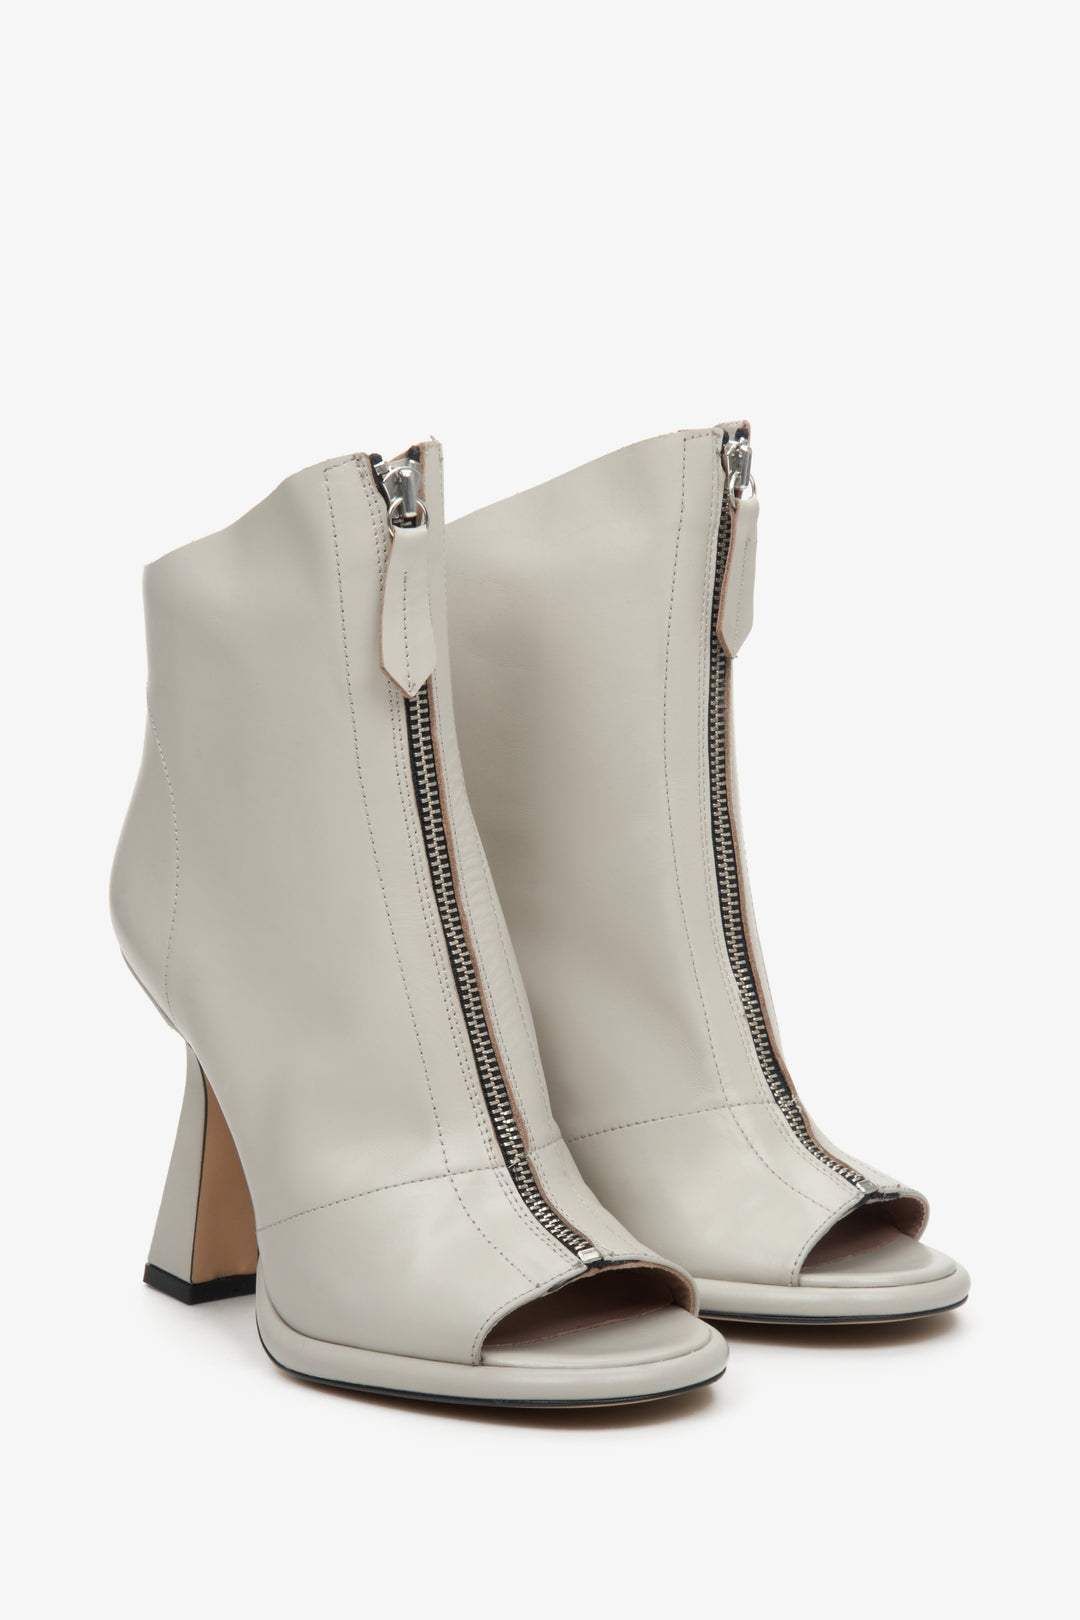 Grey leather Estro women's open-toe ankle boots - close-up of the top of the shoes.